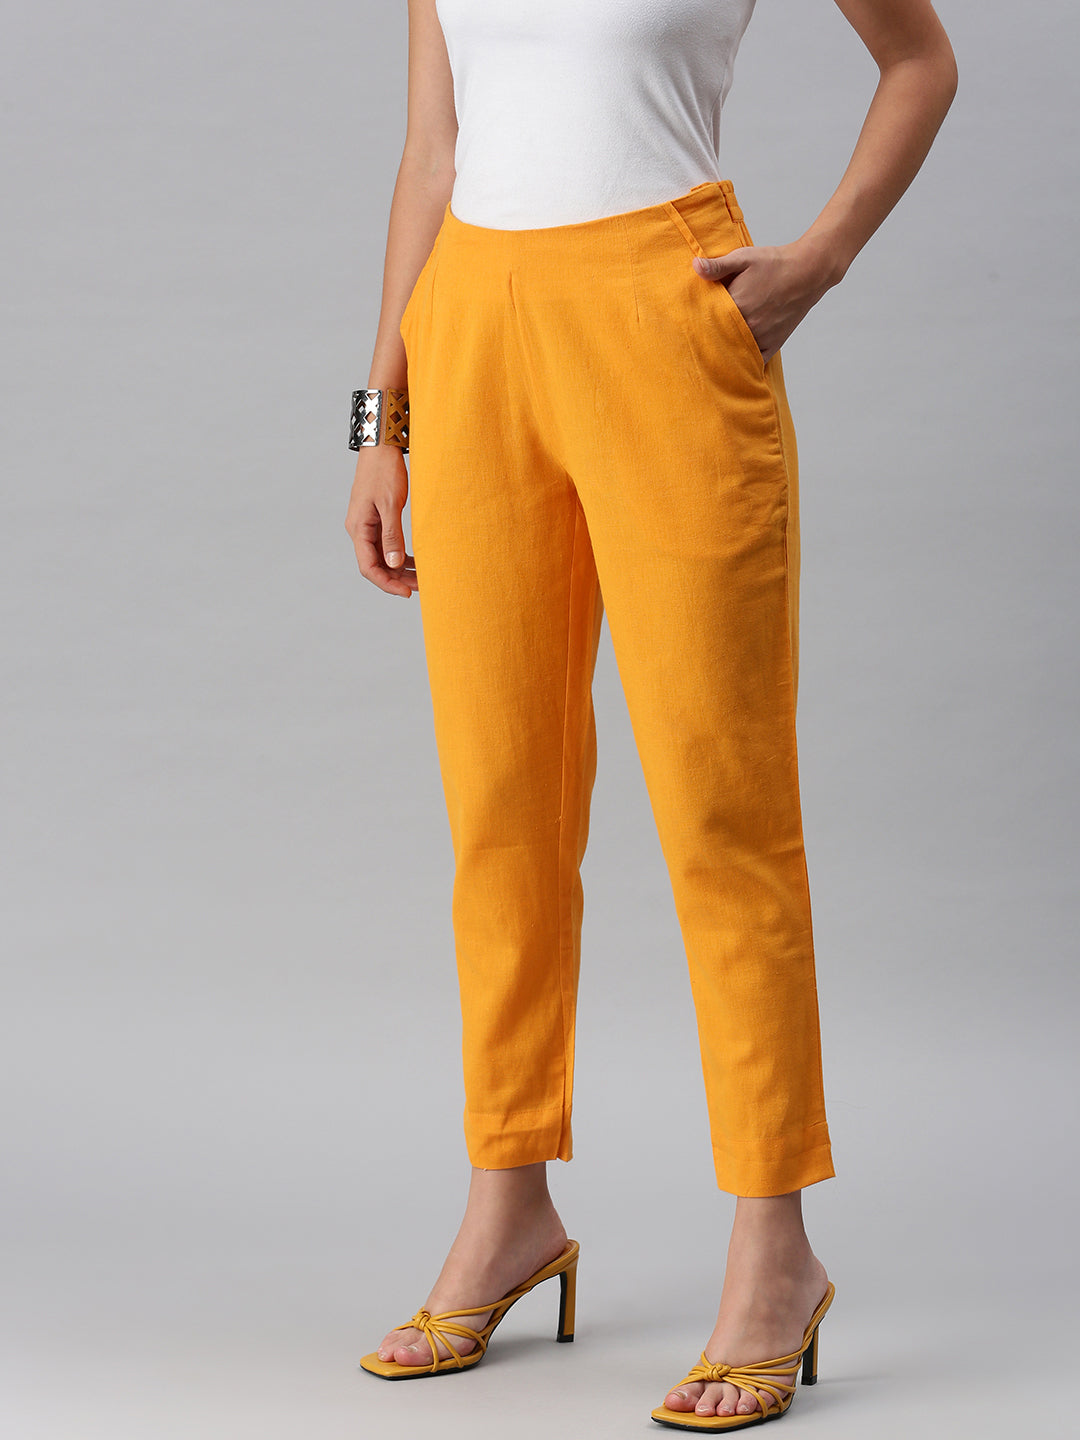 Mustard Yellow Trousers - Buy Mustard Yellow Trousers online in India